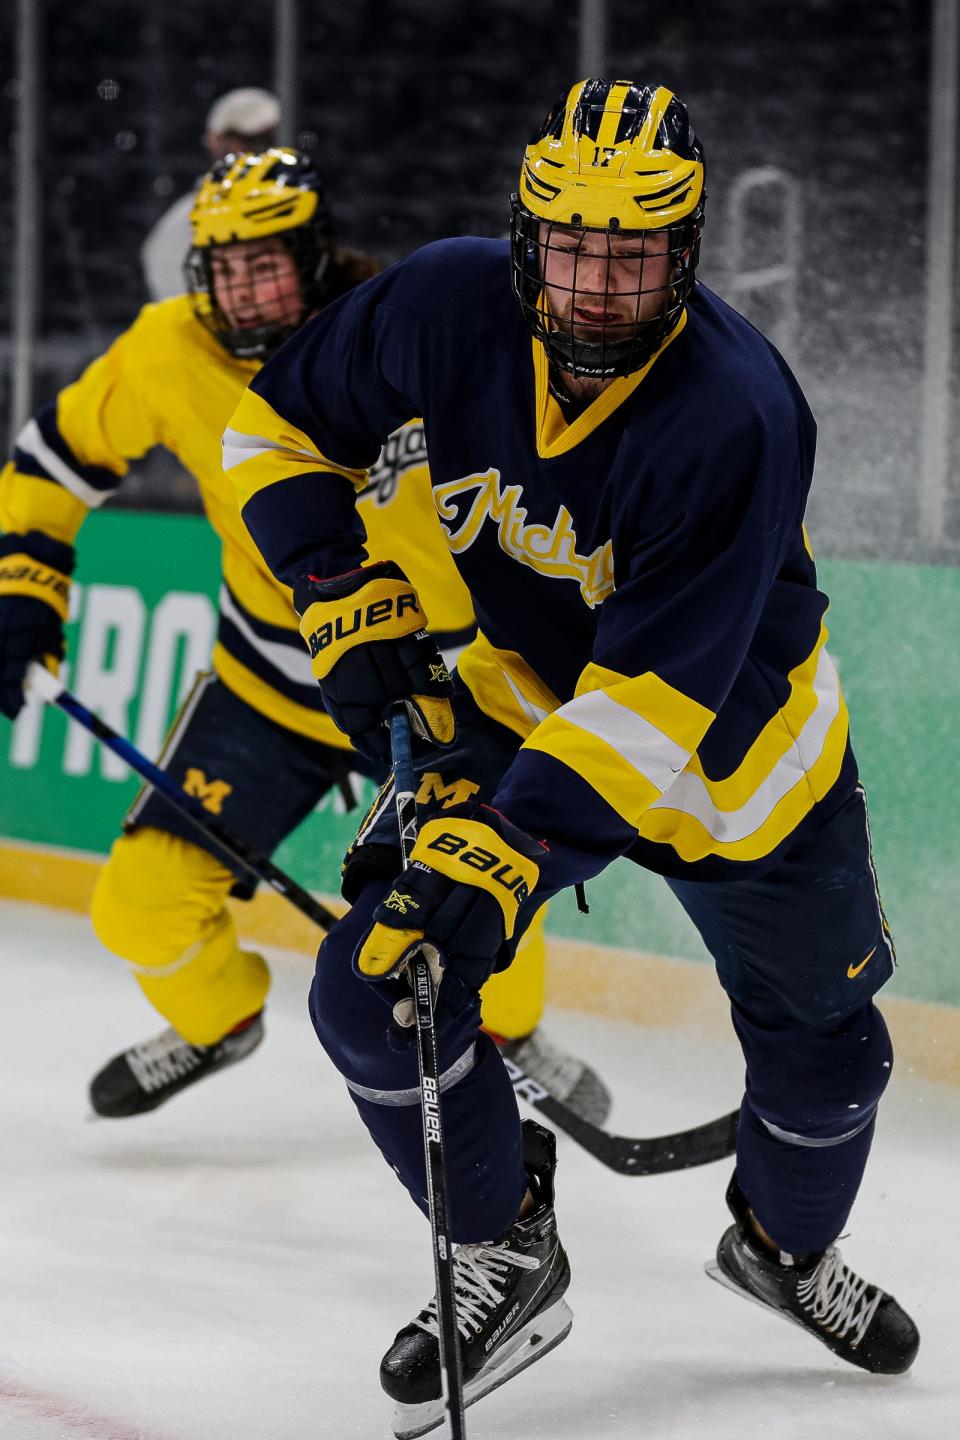 Michigan forward Johnny Beecher (17) during a practice as the Wolverines prepare for a Frozen Four matchup against Denver at TD Garden in Boston on Wednesday, April 6, 2022.